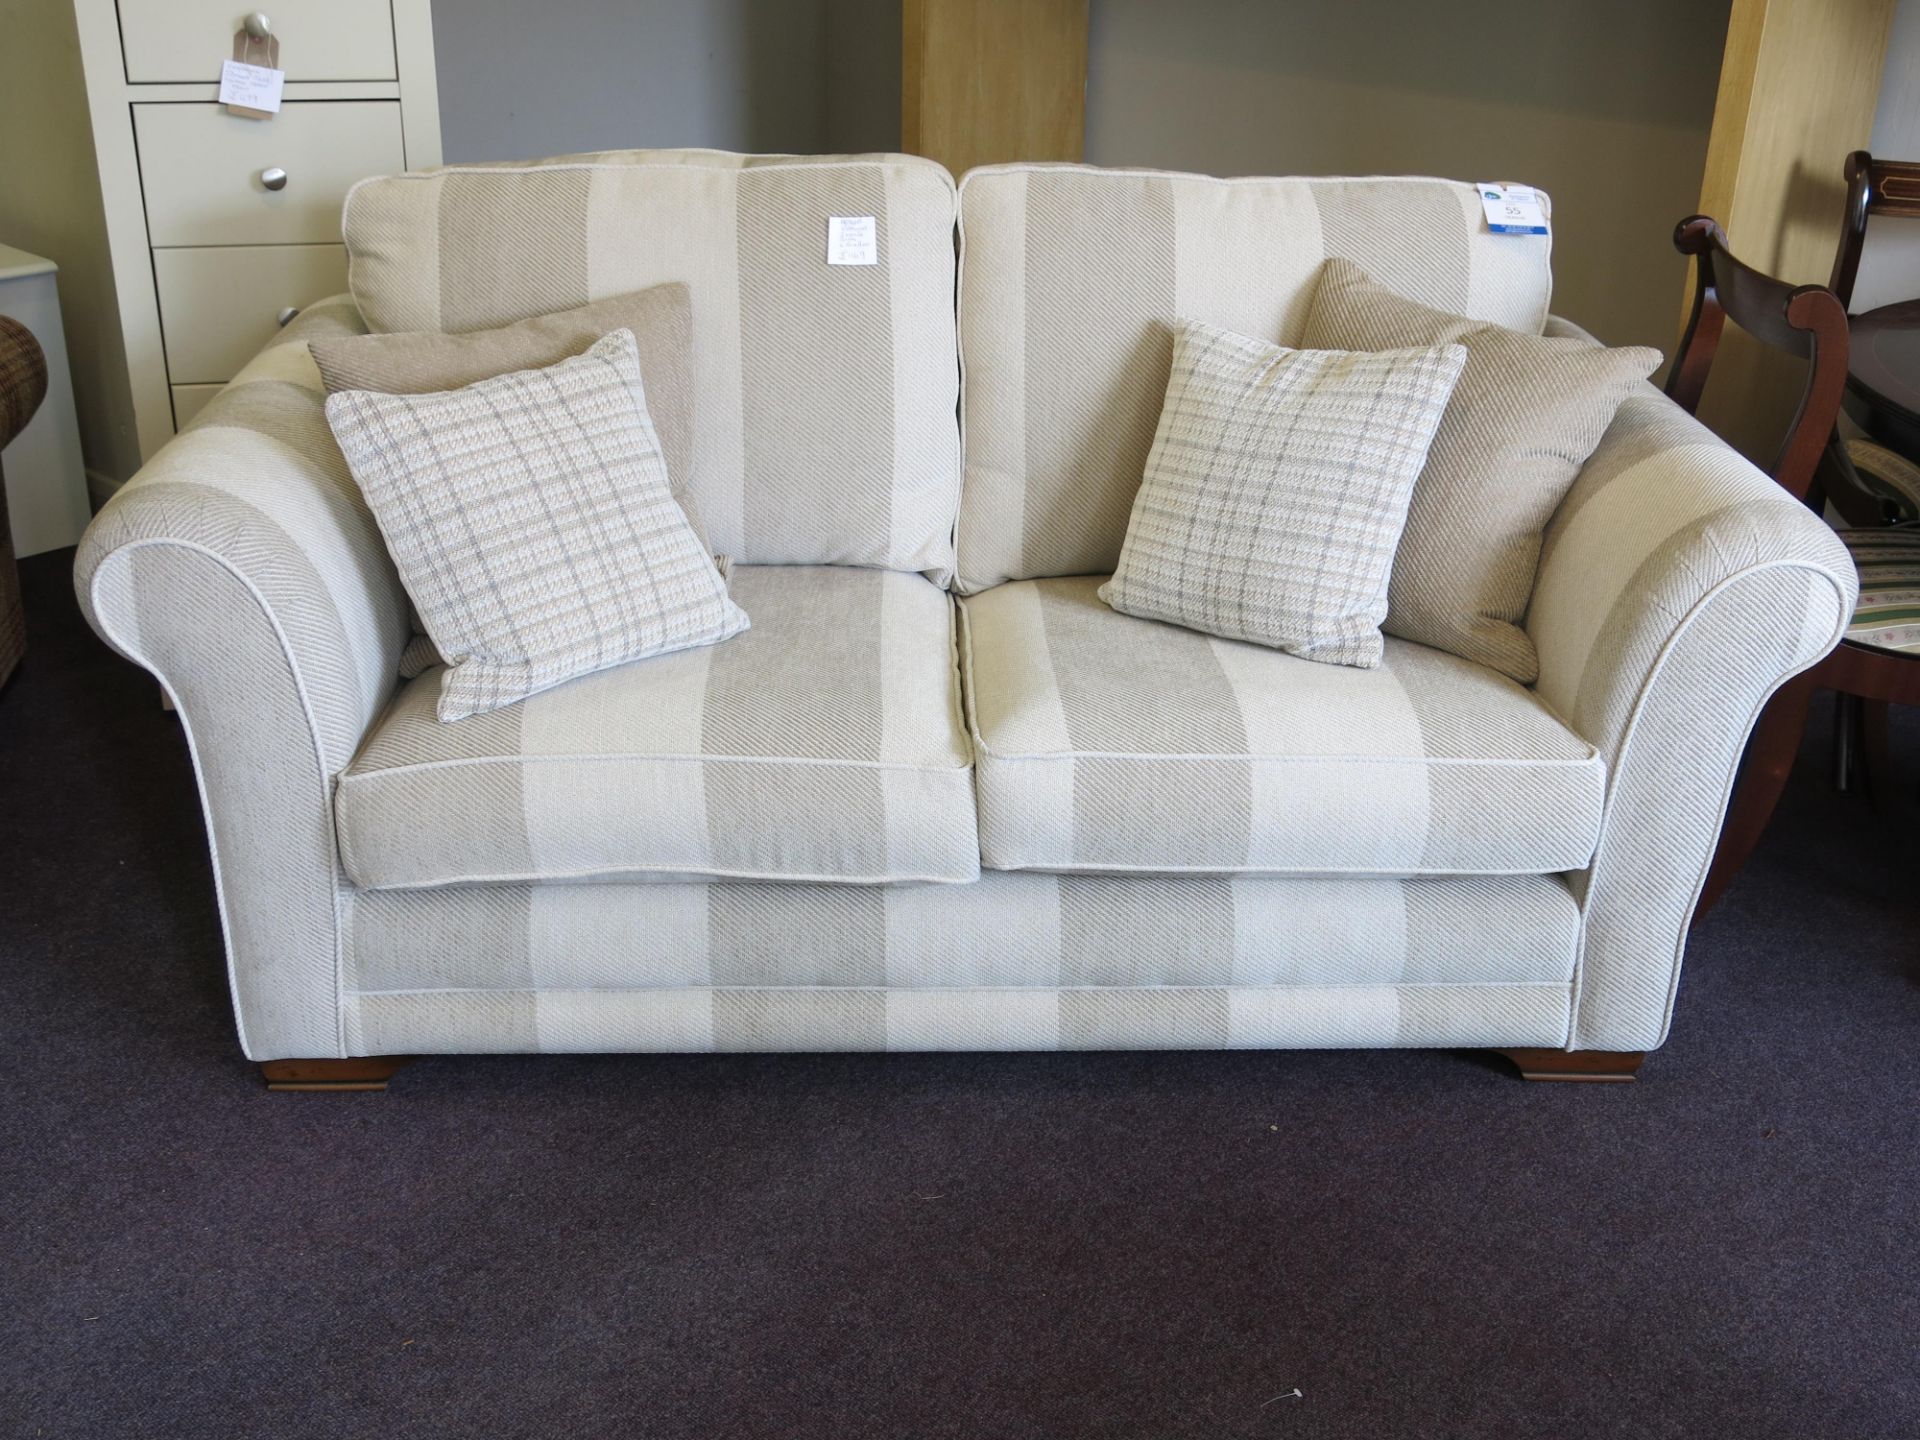 Alstons Vermont two seat sofa with four scatter cushions. The sofa is covered with natural tweed